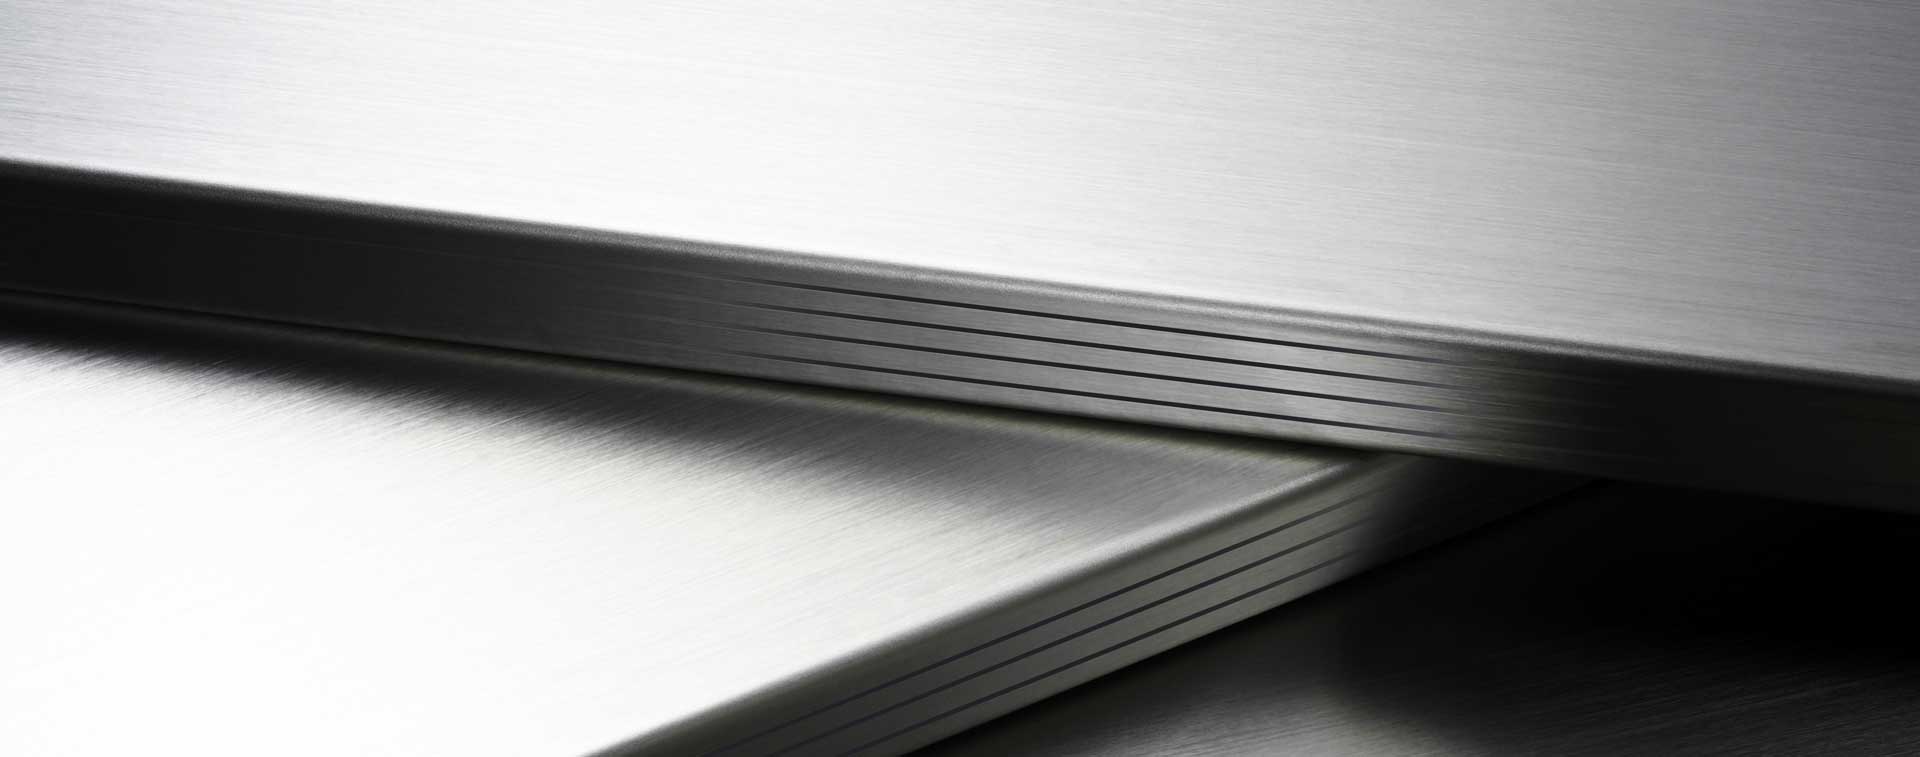 Stainless Steel Sheet & Plates